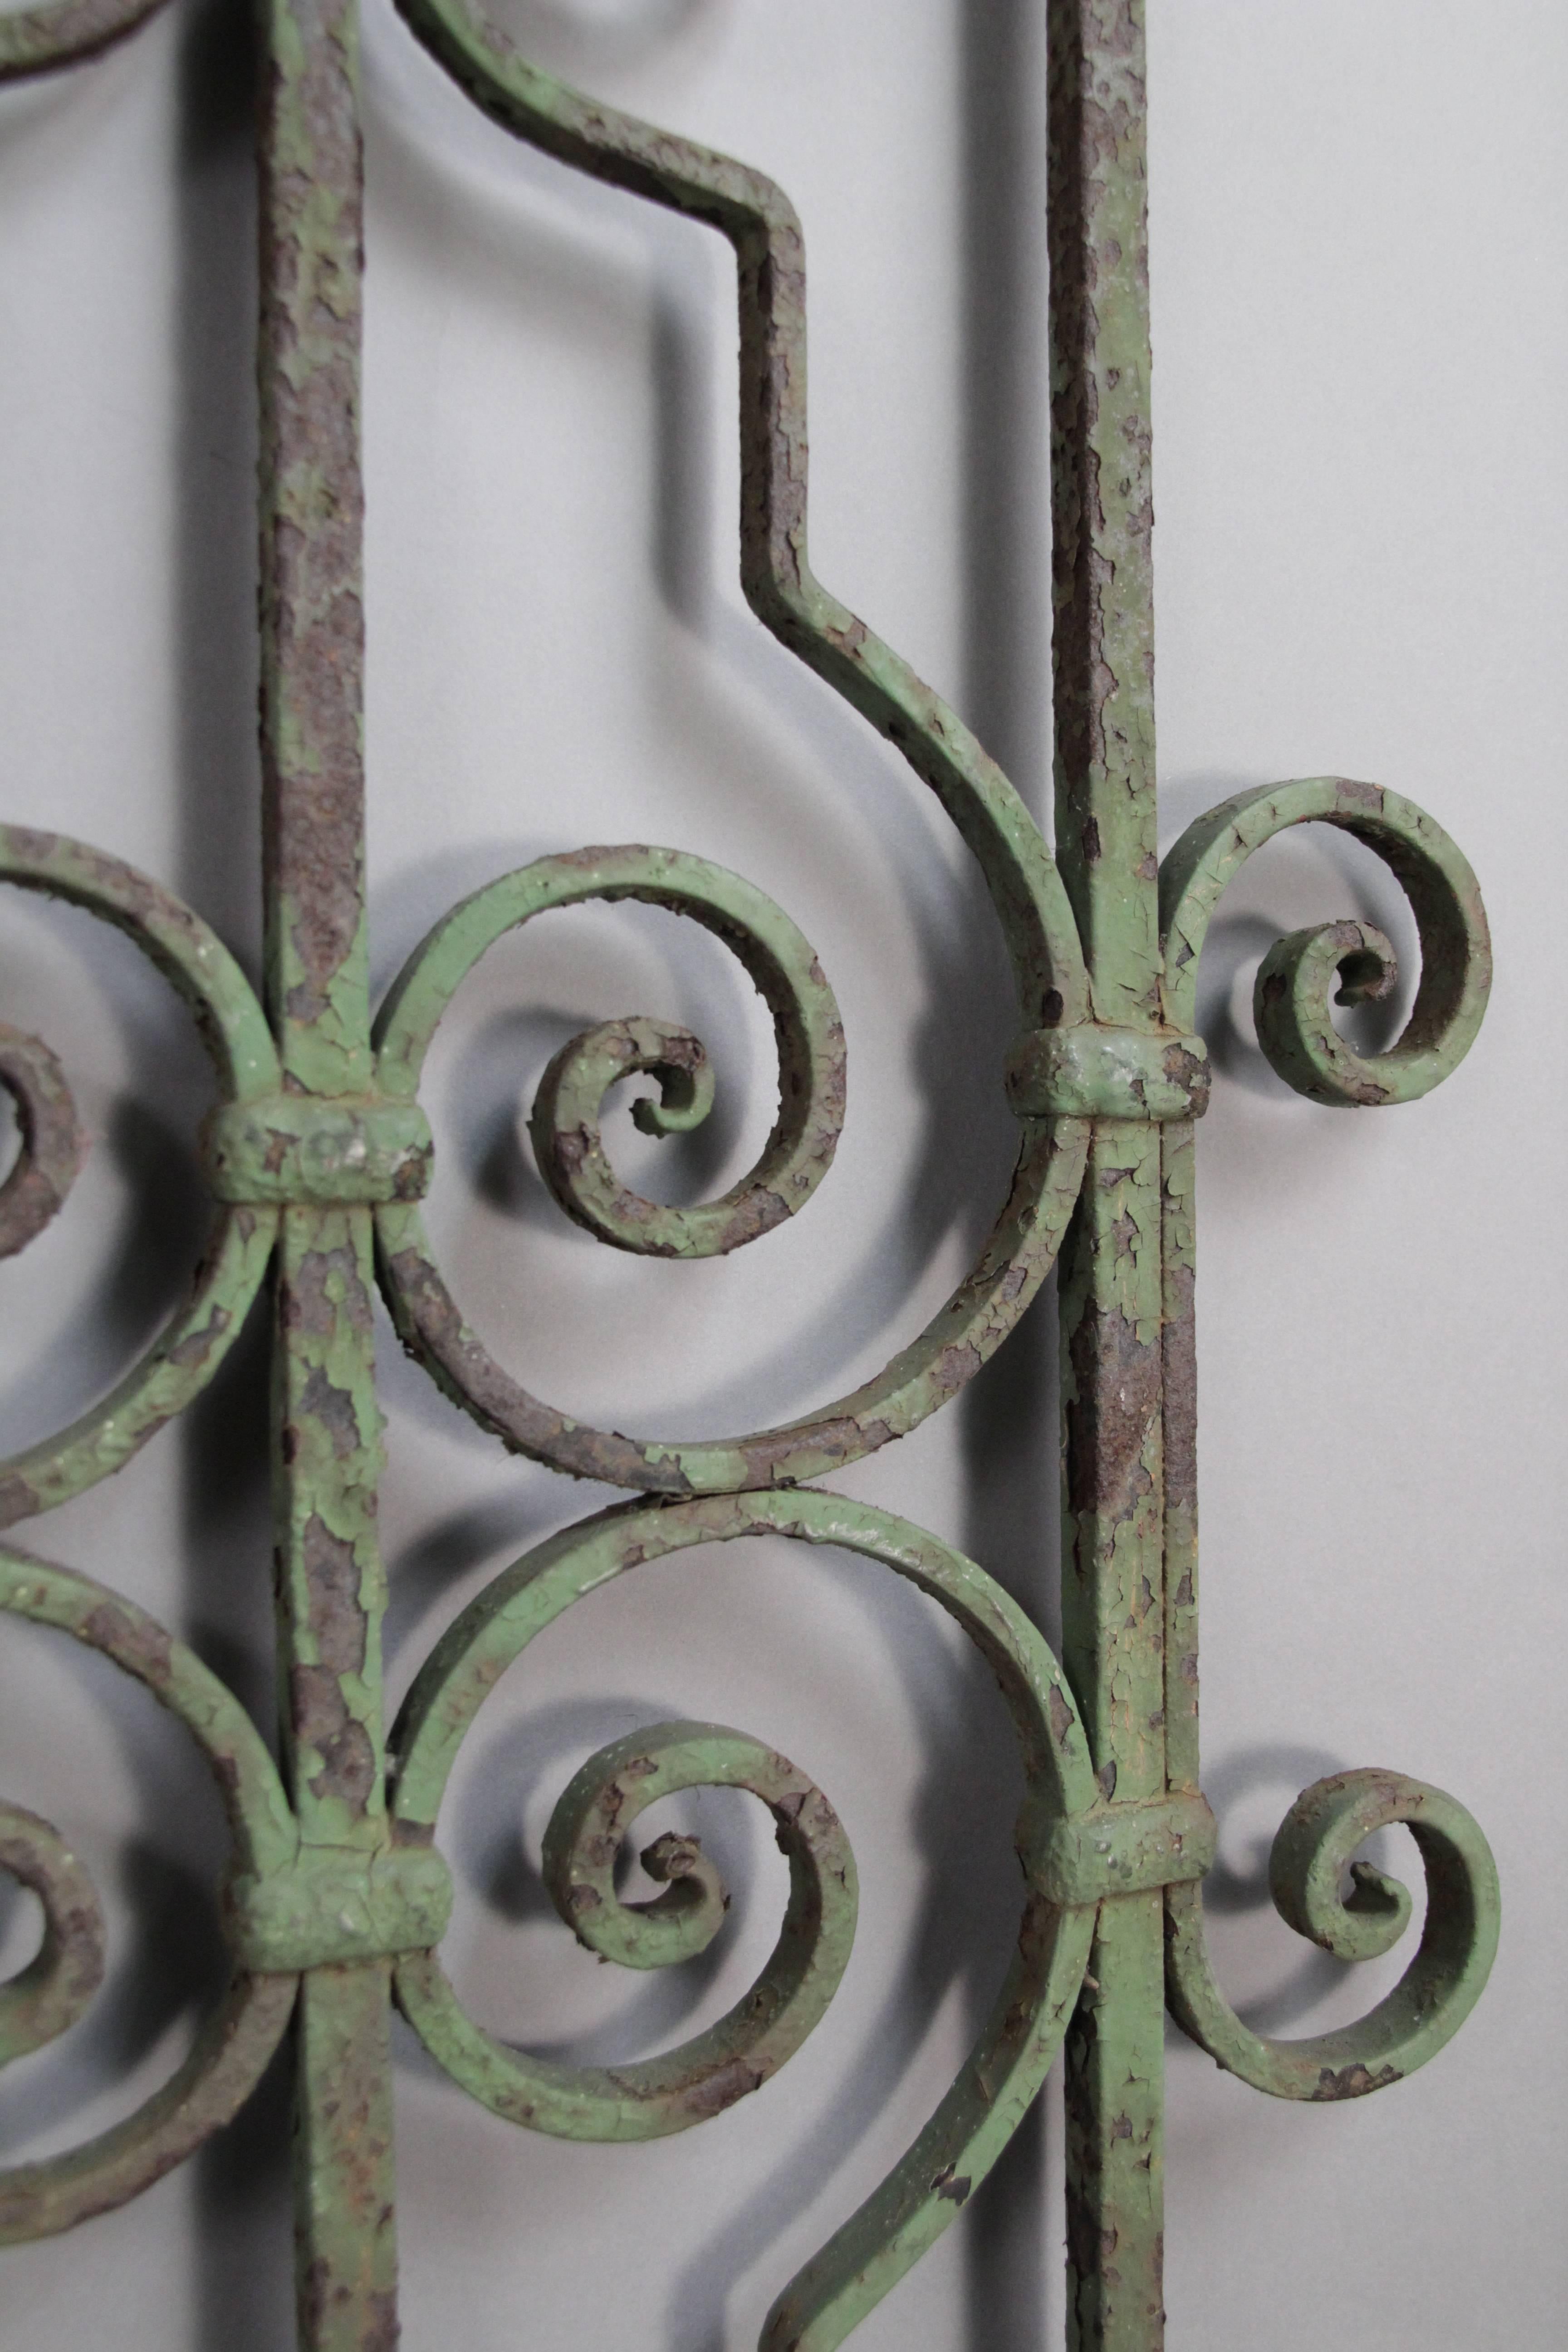 North American 1920s Spanish Revival Wrought Iron Garden Gate